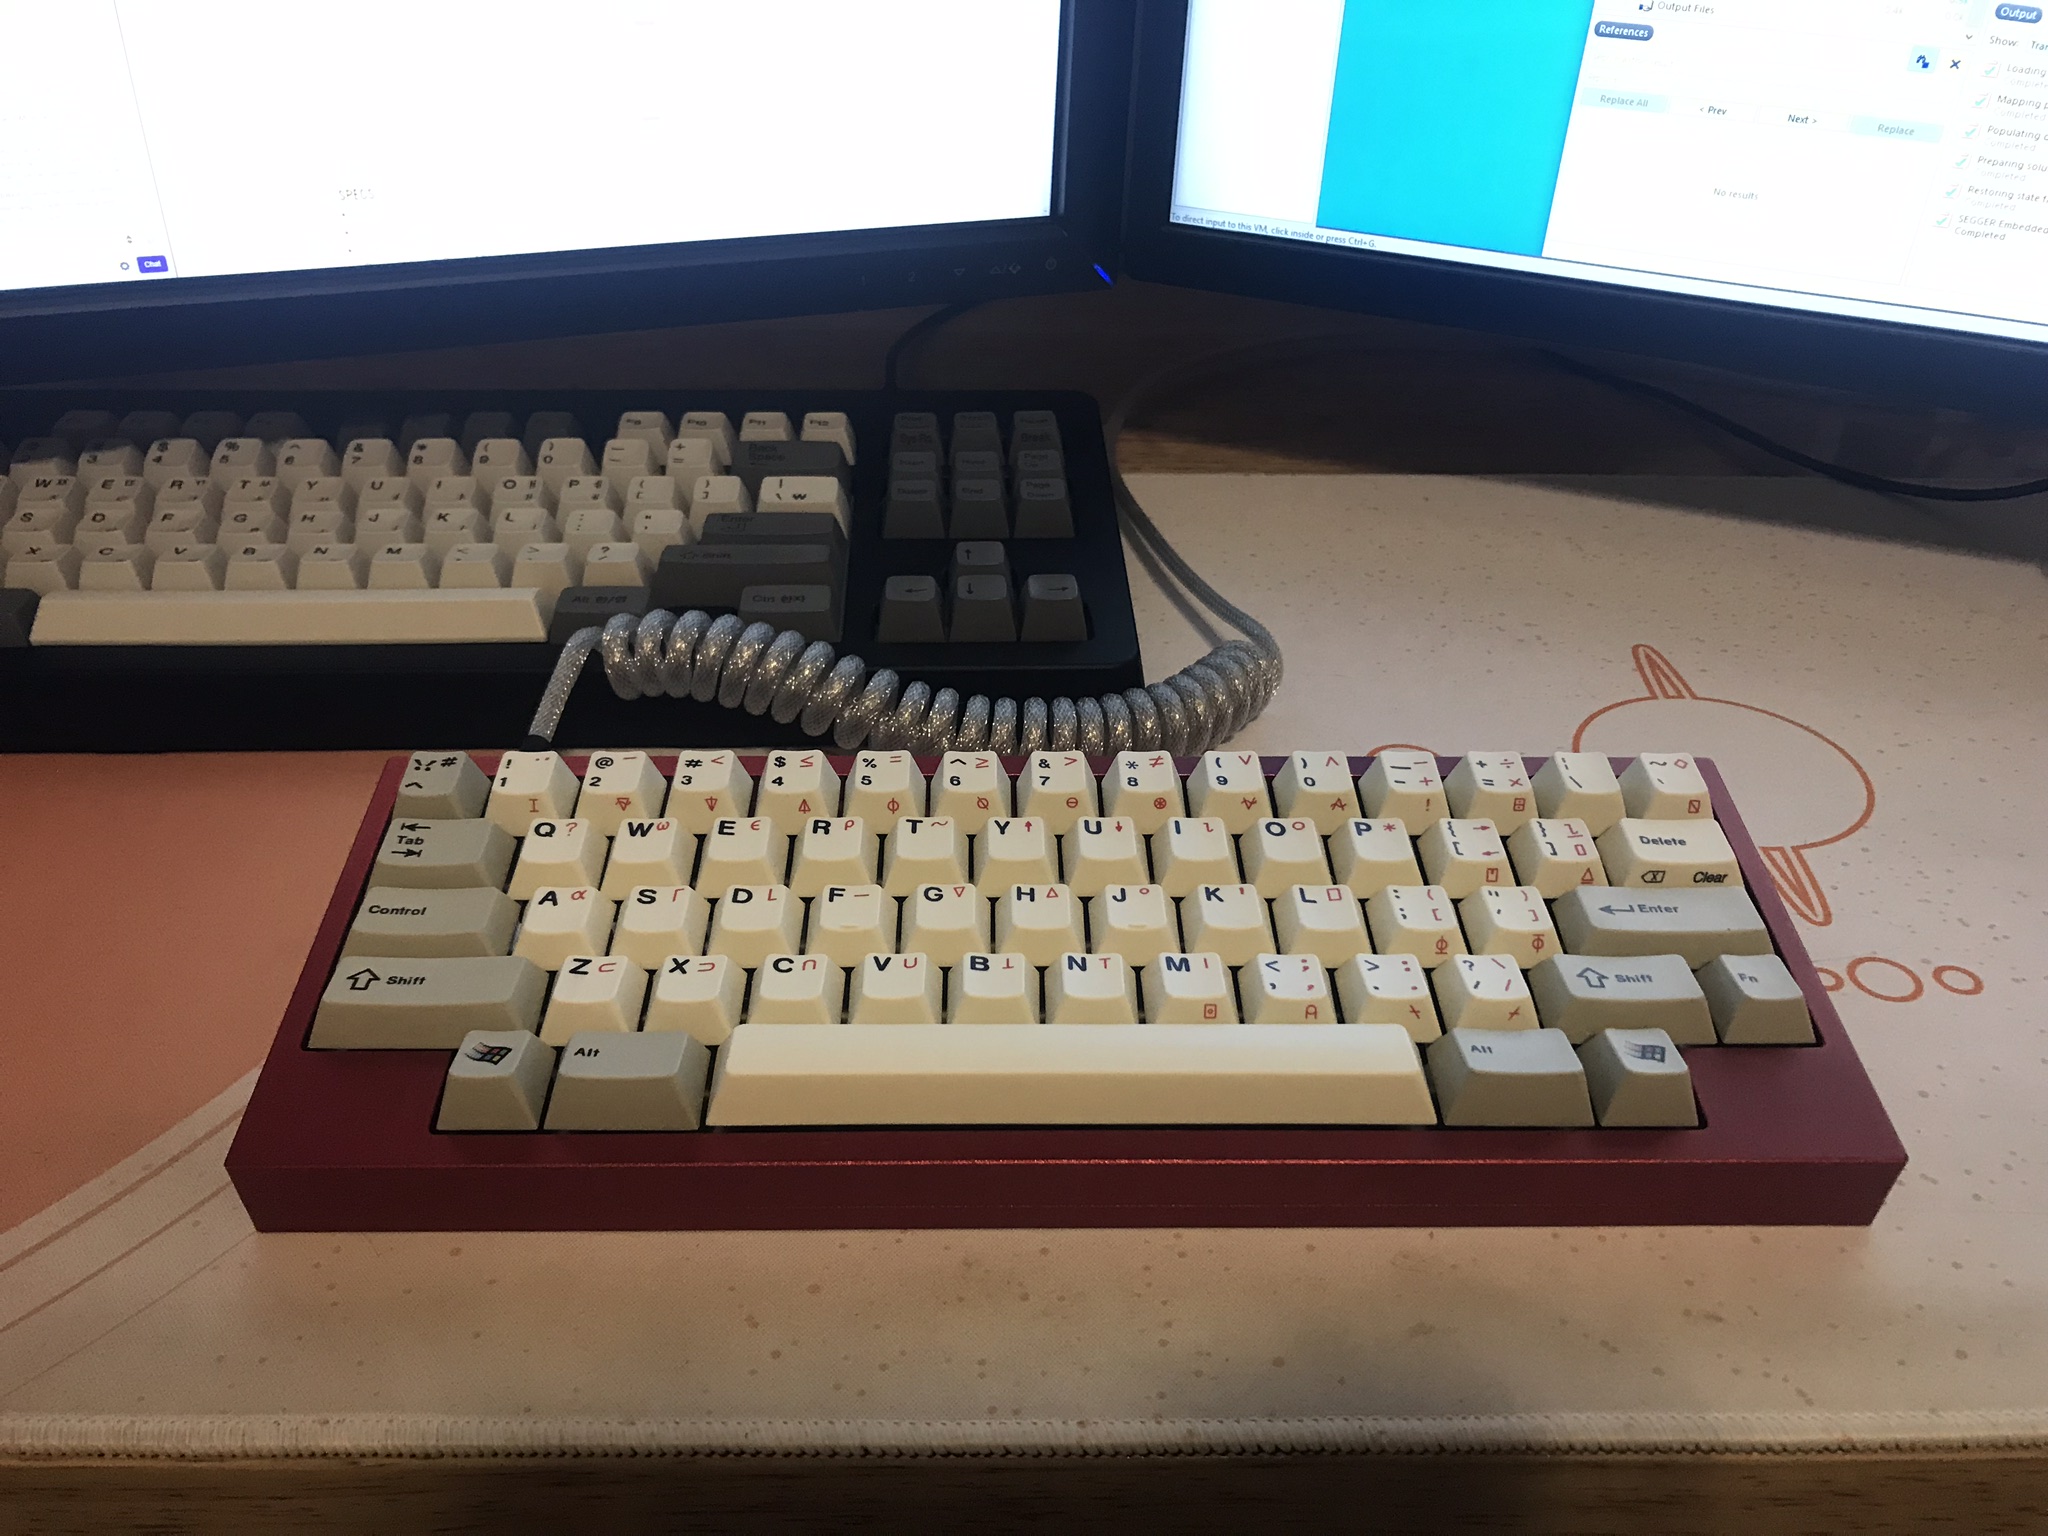 Post Your Keyboards! - Learning and discussion - KeebTalk